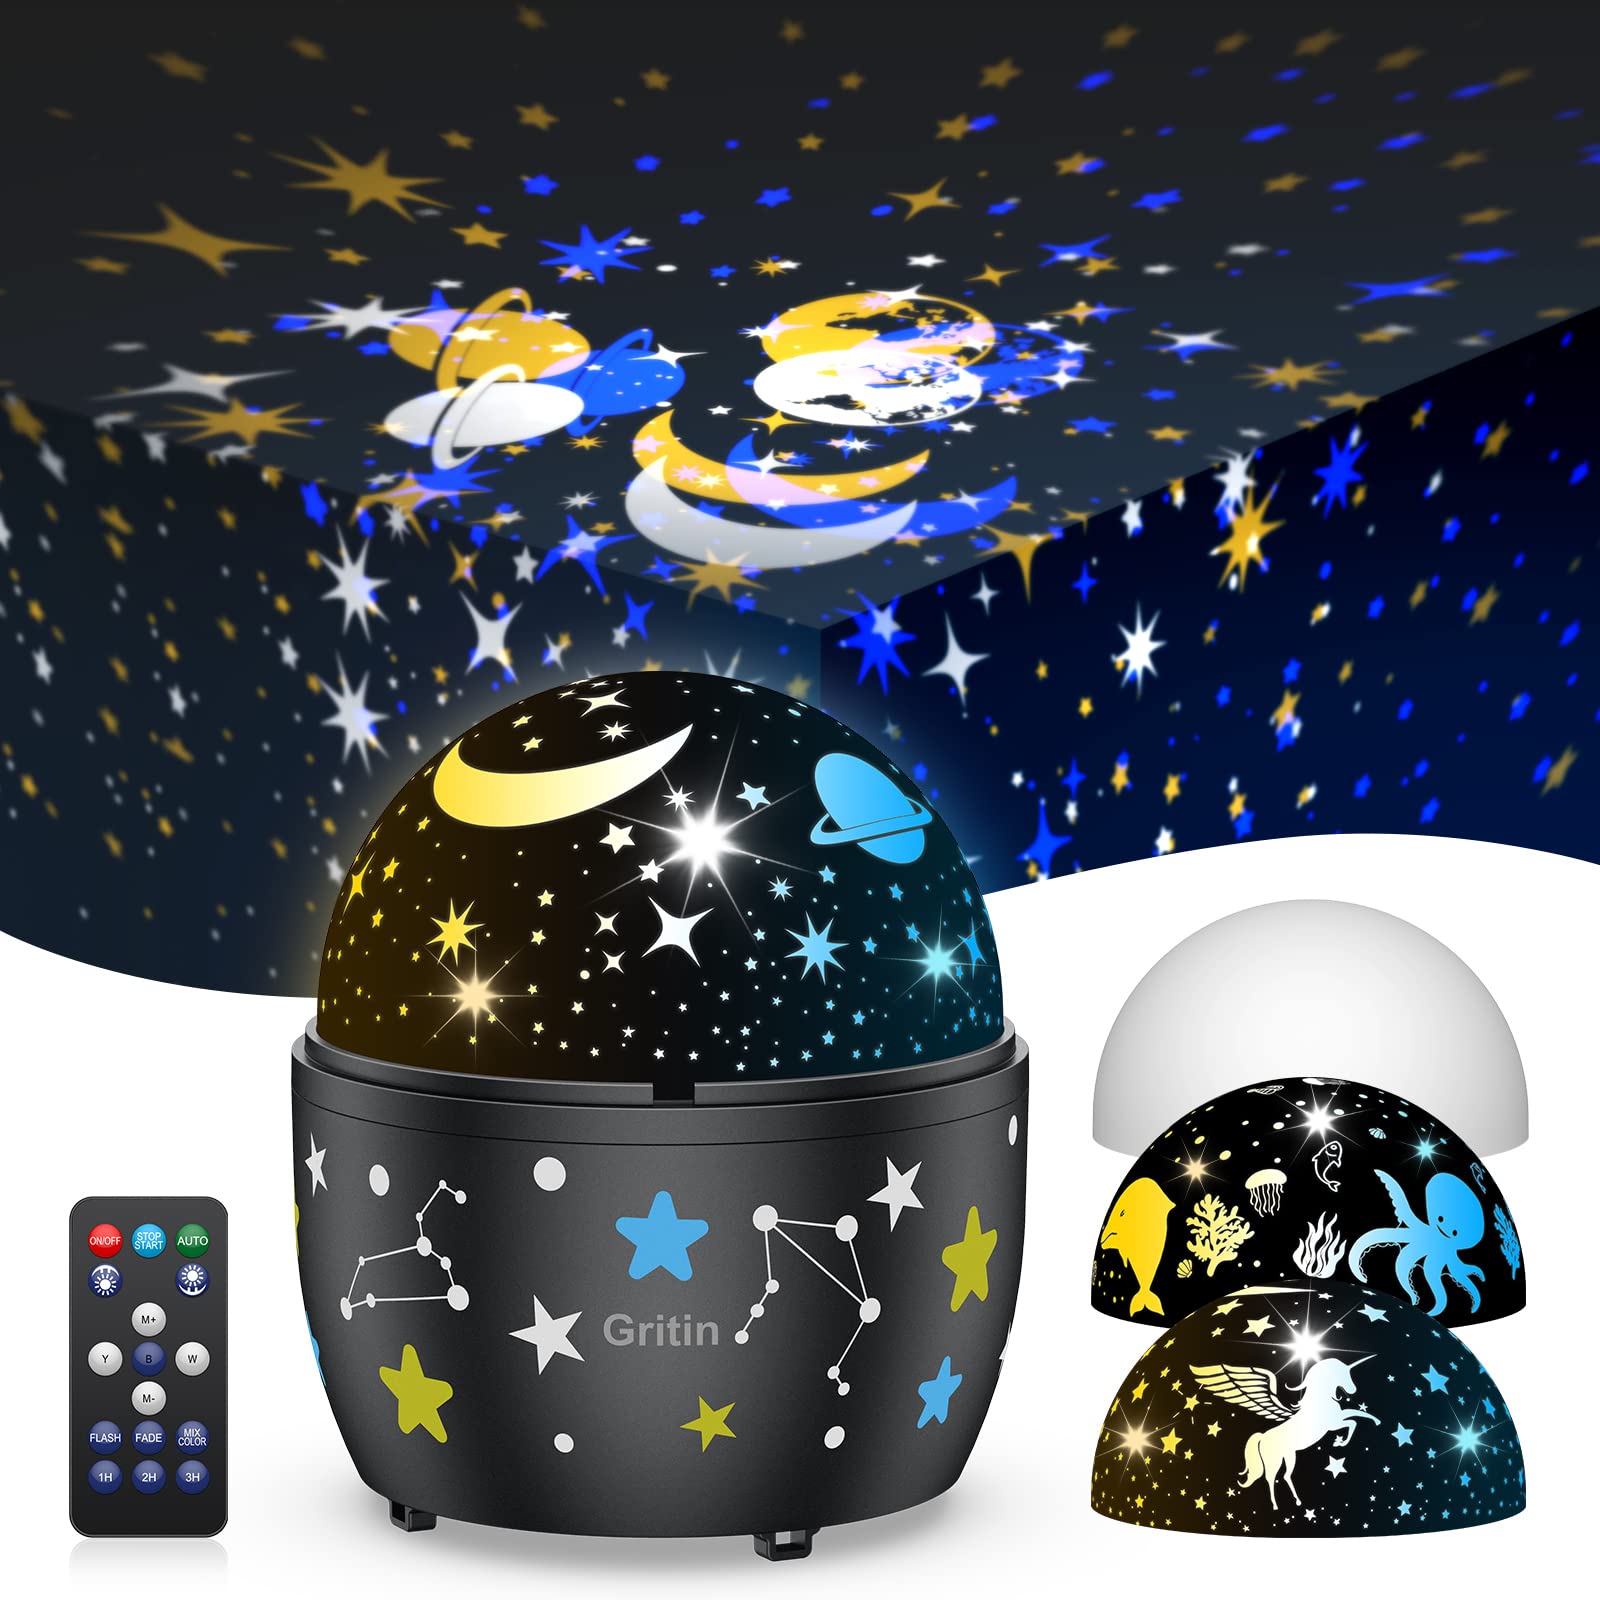 Night Light Projector, Gritin Star Starry Galaxy Projector Night Light Baby Kids Gifts with 3 Themes - 360° Rotation, 7 Color Modes, Remote Control&Timer Design for Kids Baby Bedroom,Birthday,Parties